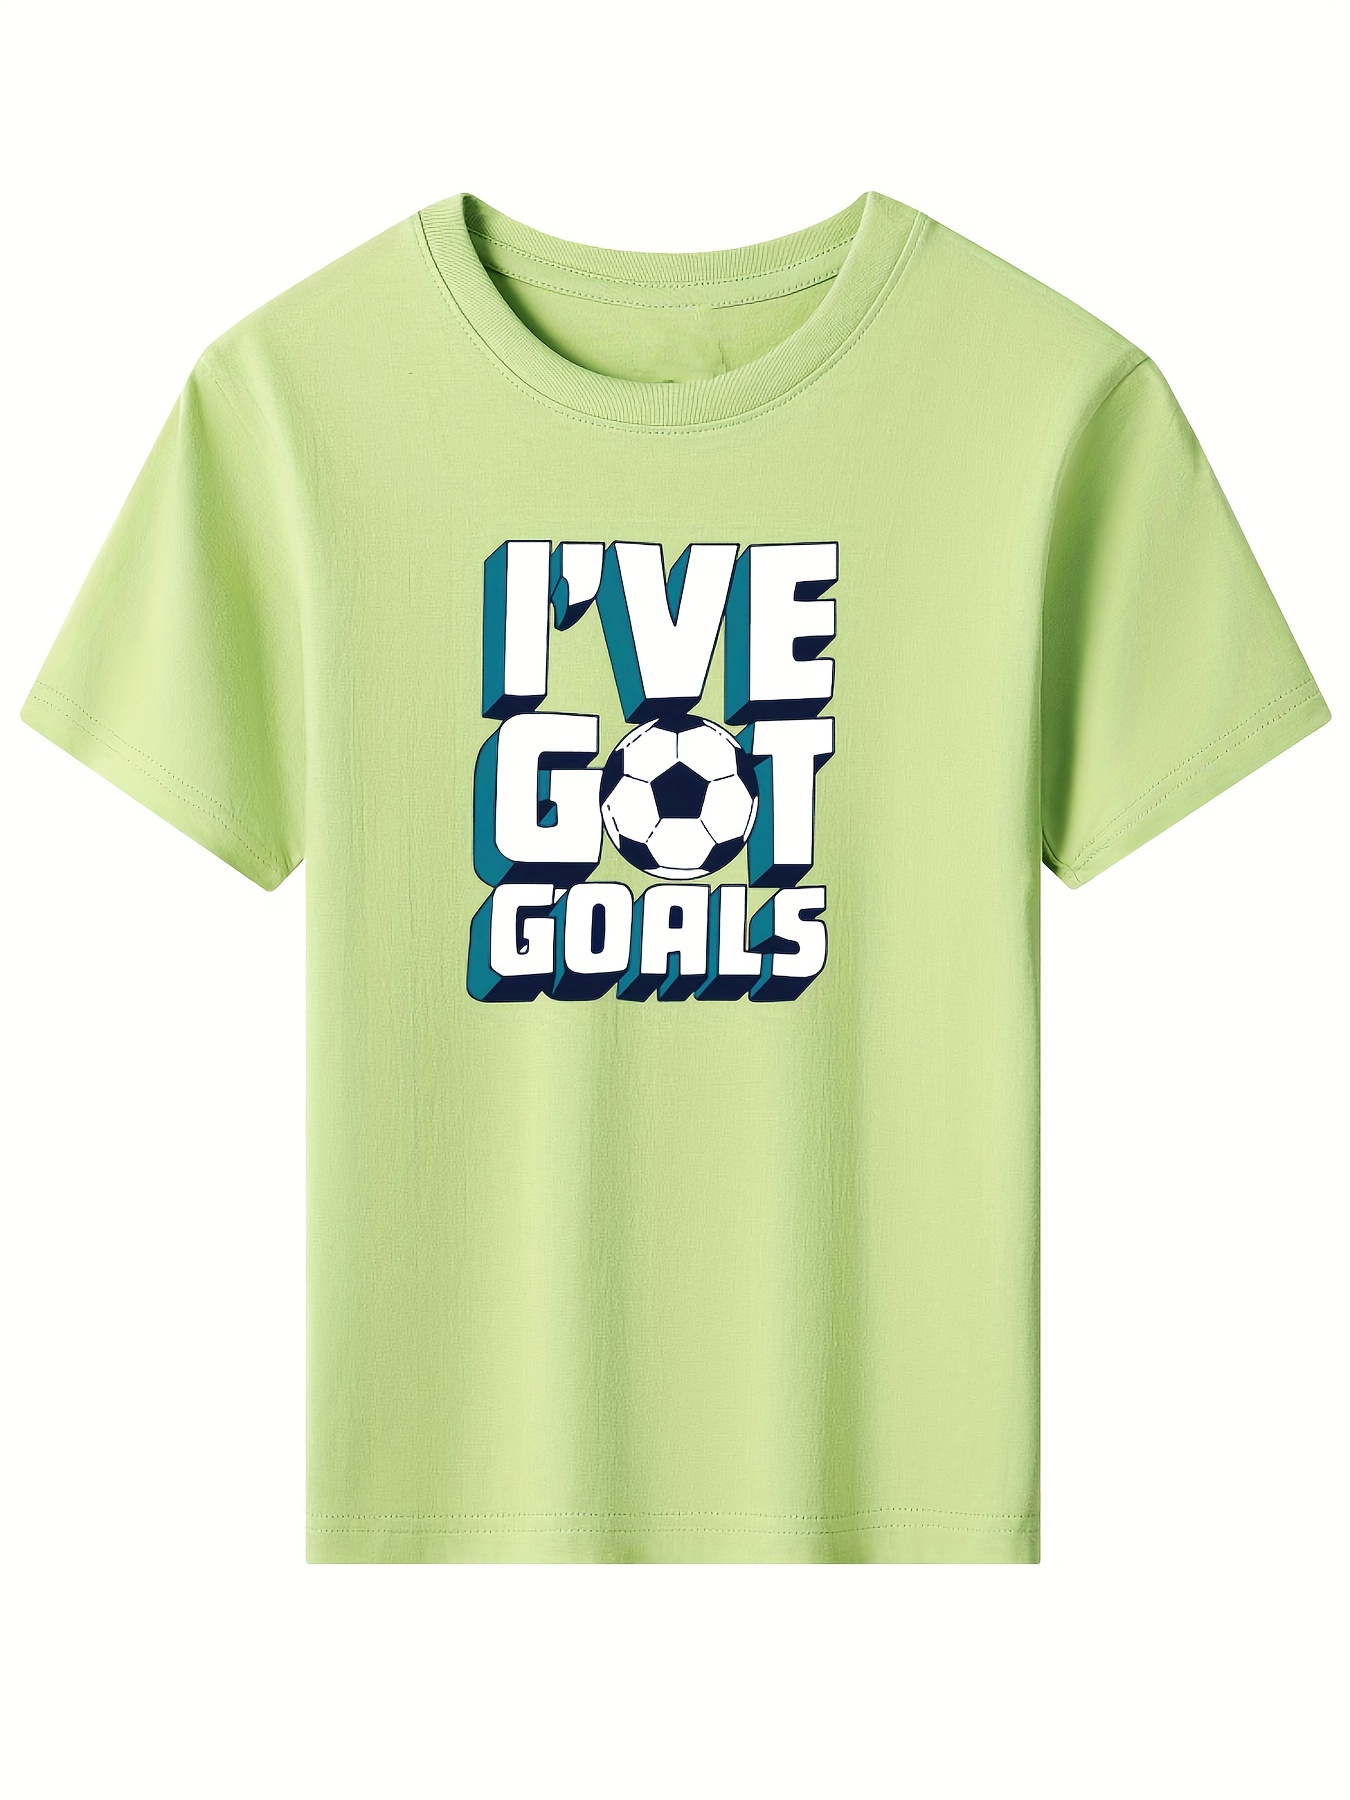 Football Goal Print T-shirts For Boys - Cool, Lightweight And